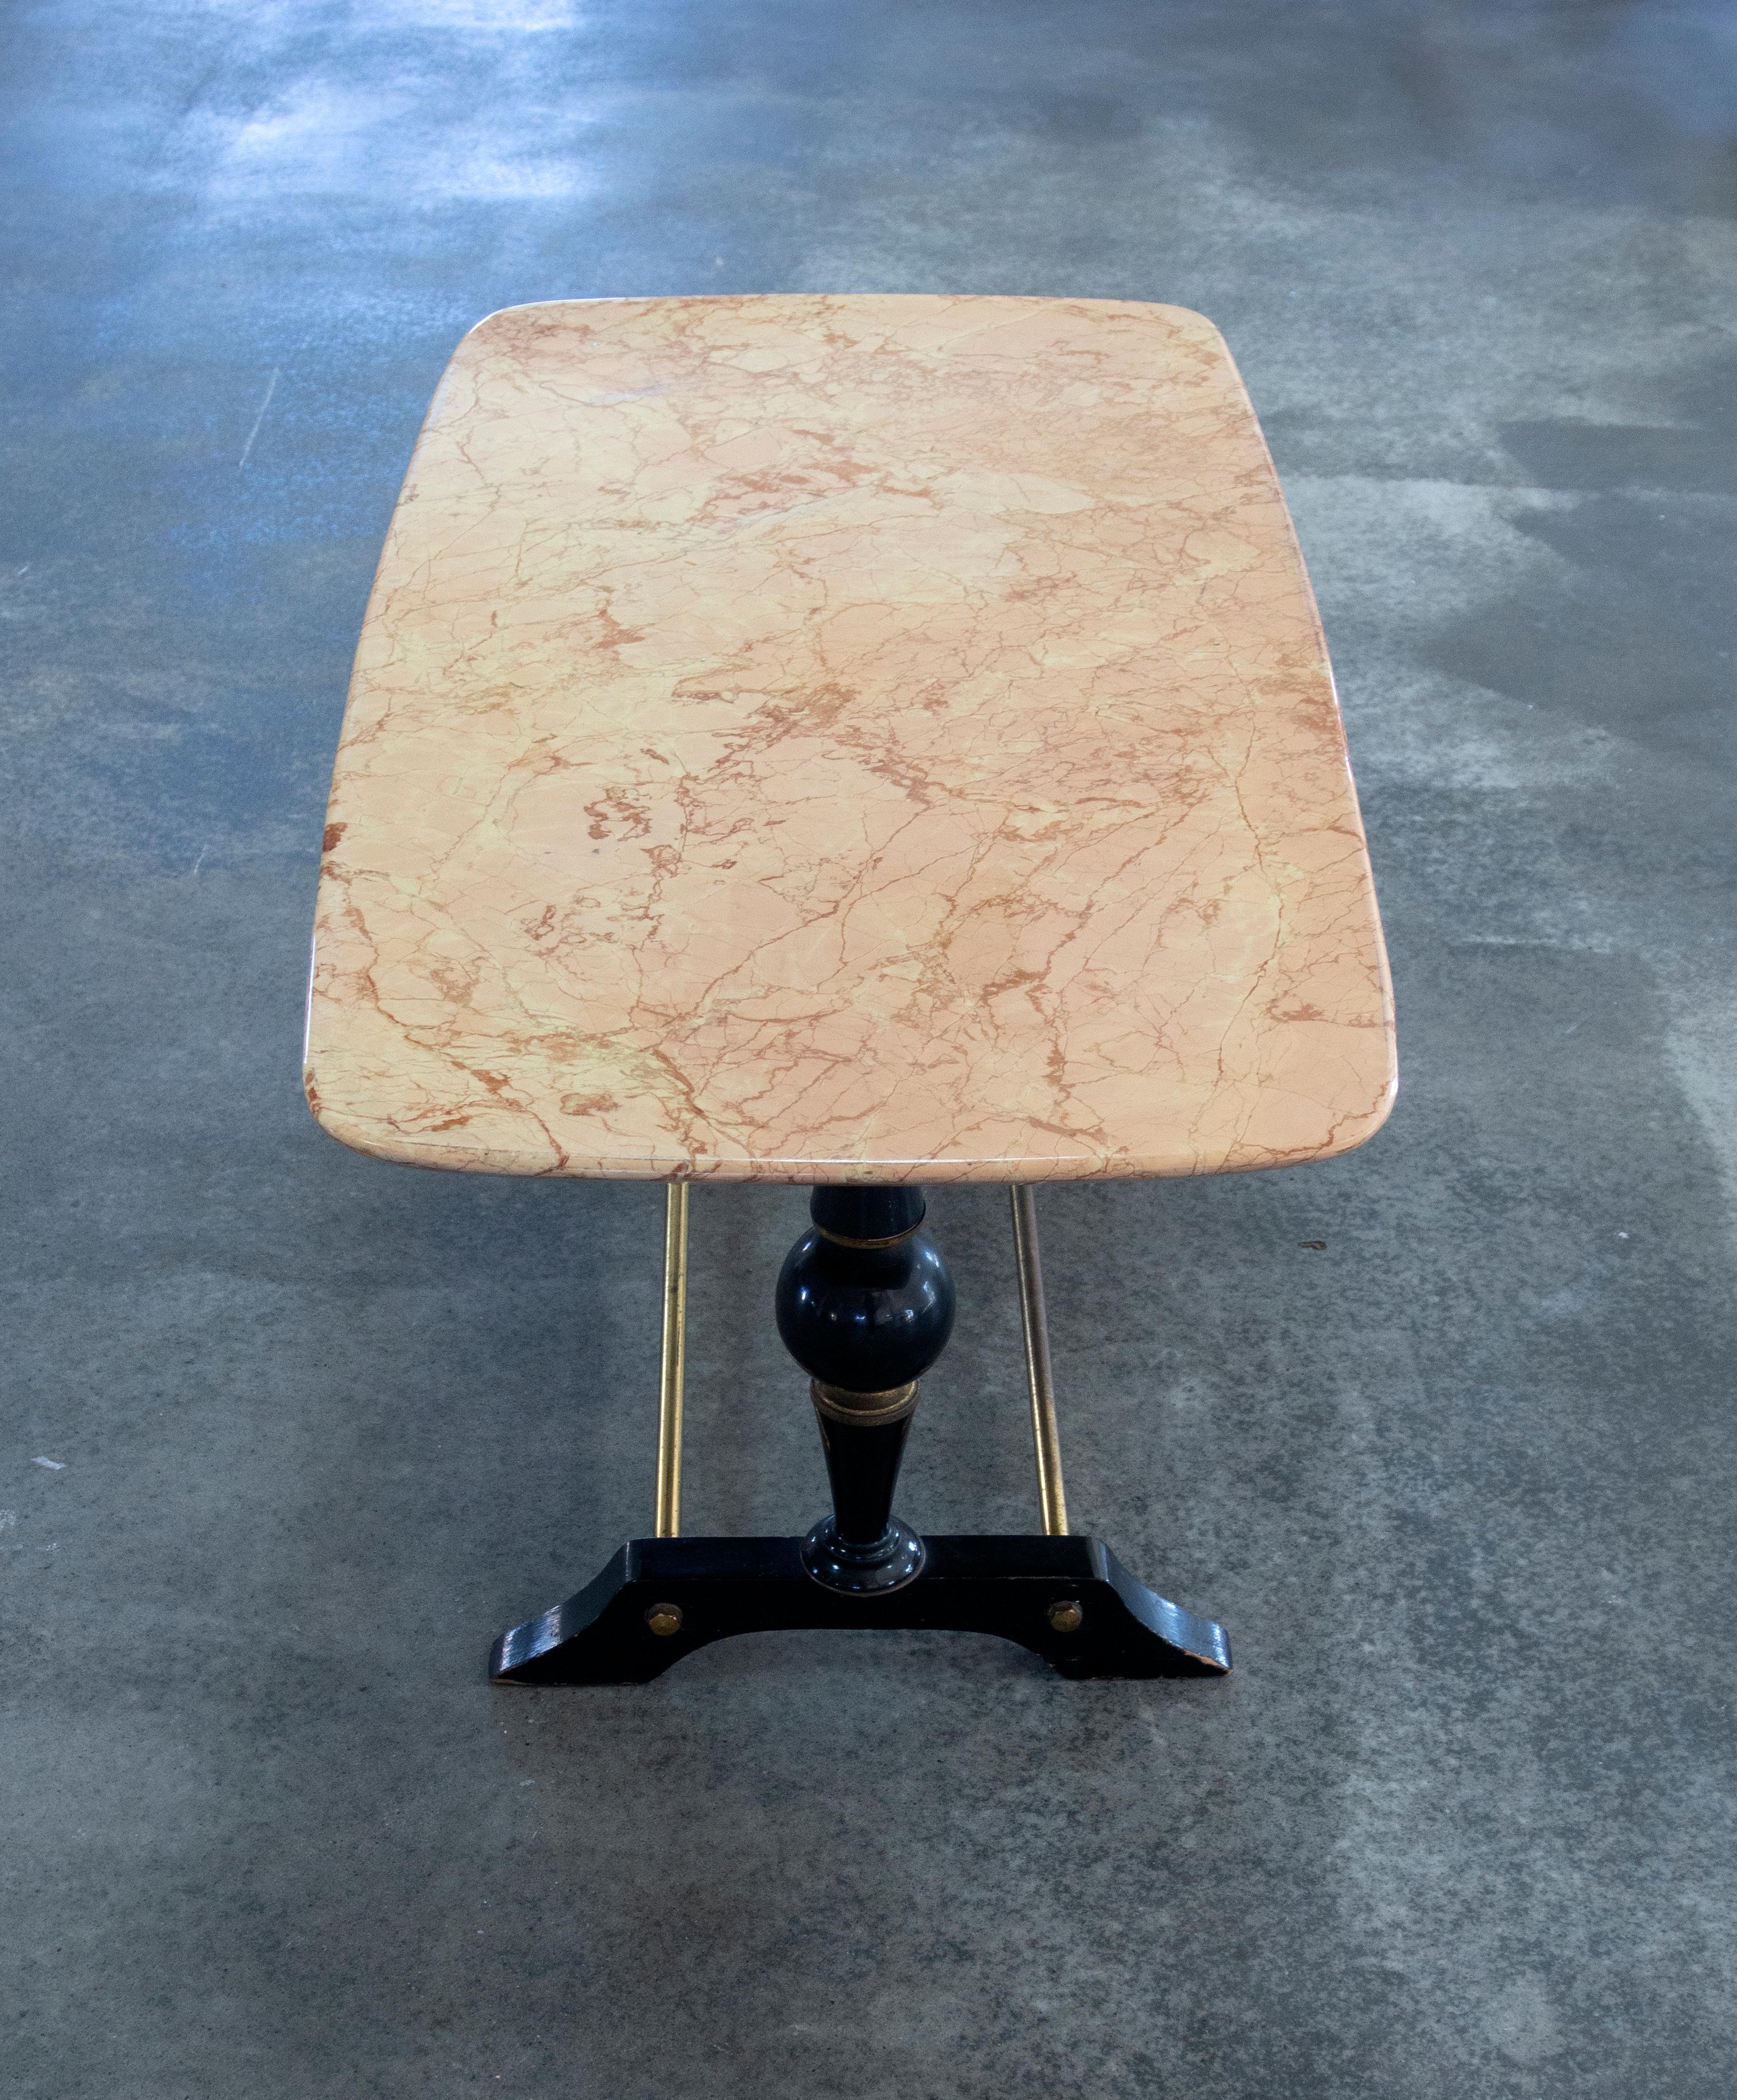 In this listing you will find a beautiful marble top coffee or side table on wooden and brass stand. Author is not known. The table was sourced in Venice, Italy. Estimate period of manufacture is late 1950s. 

There are small signs of wear, such